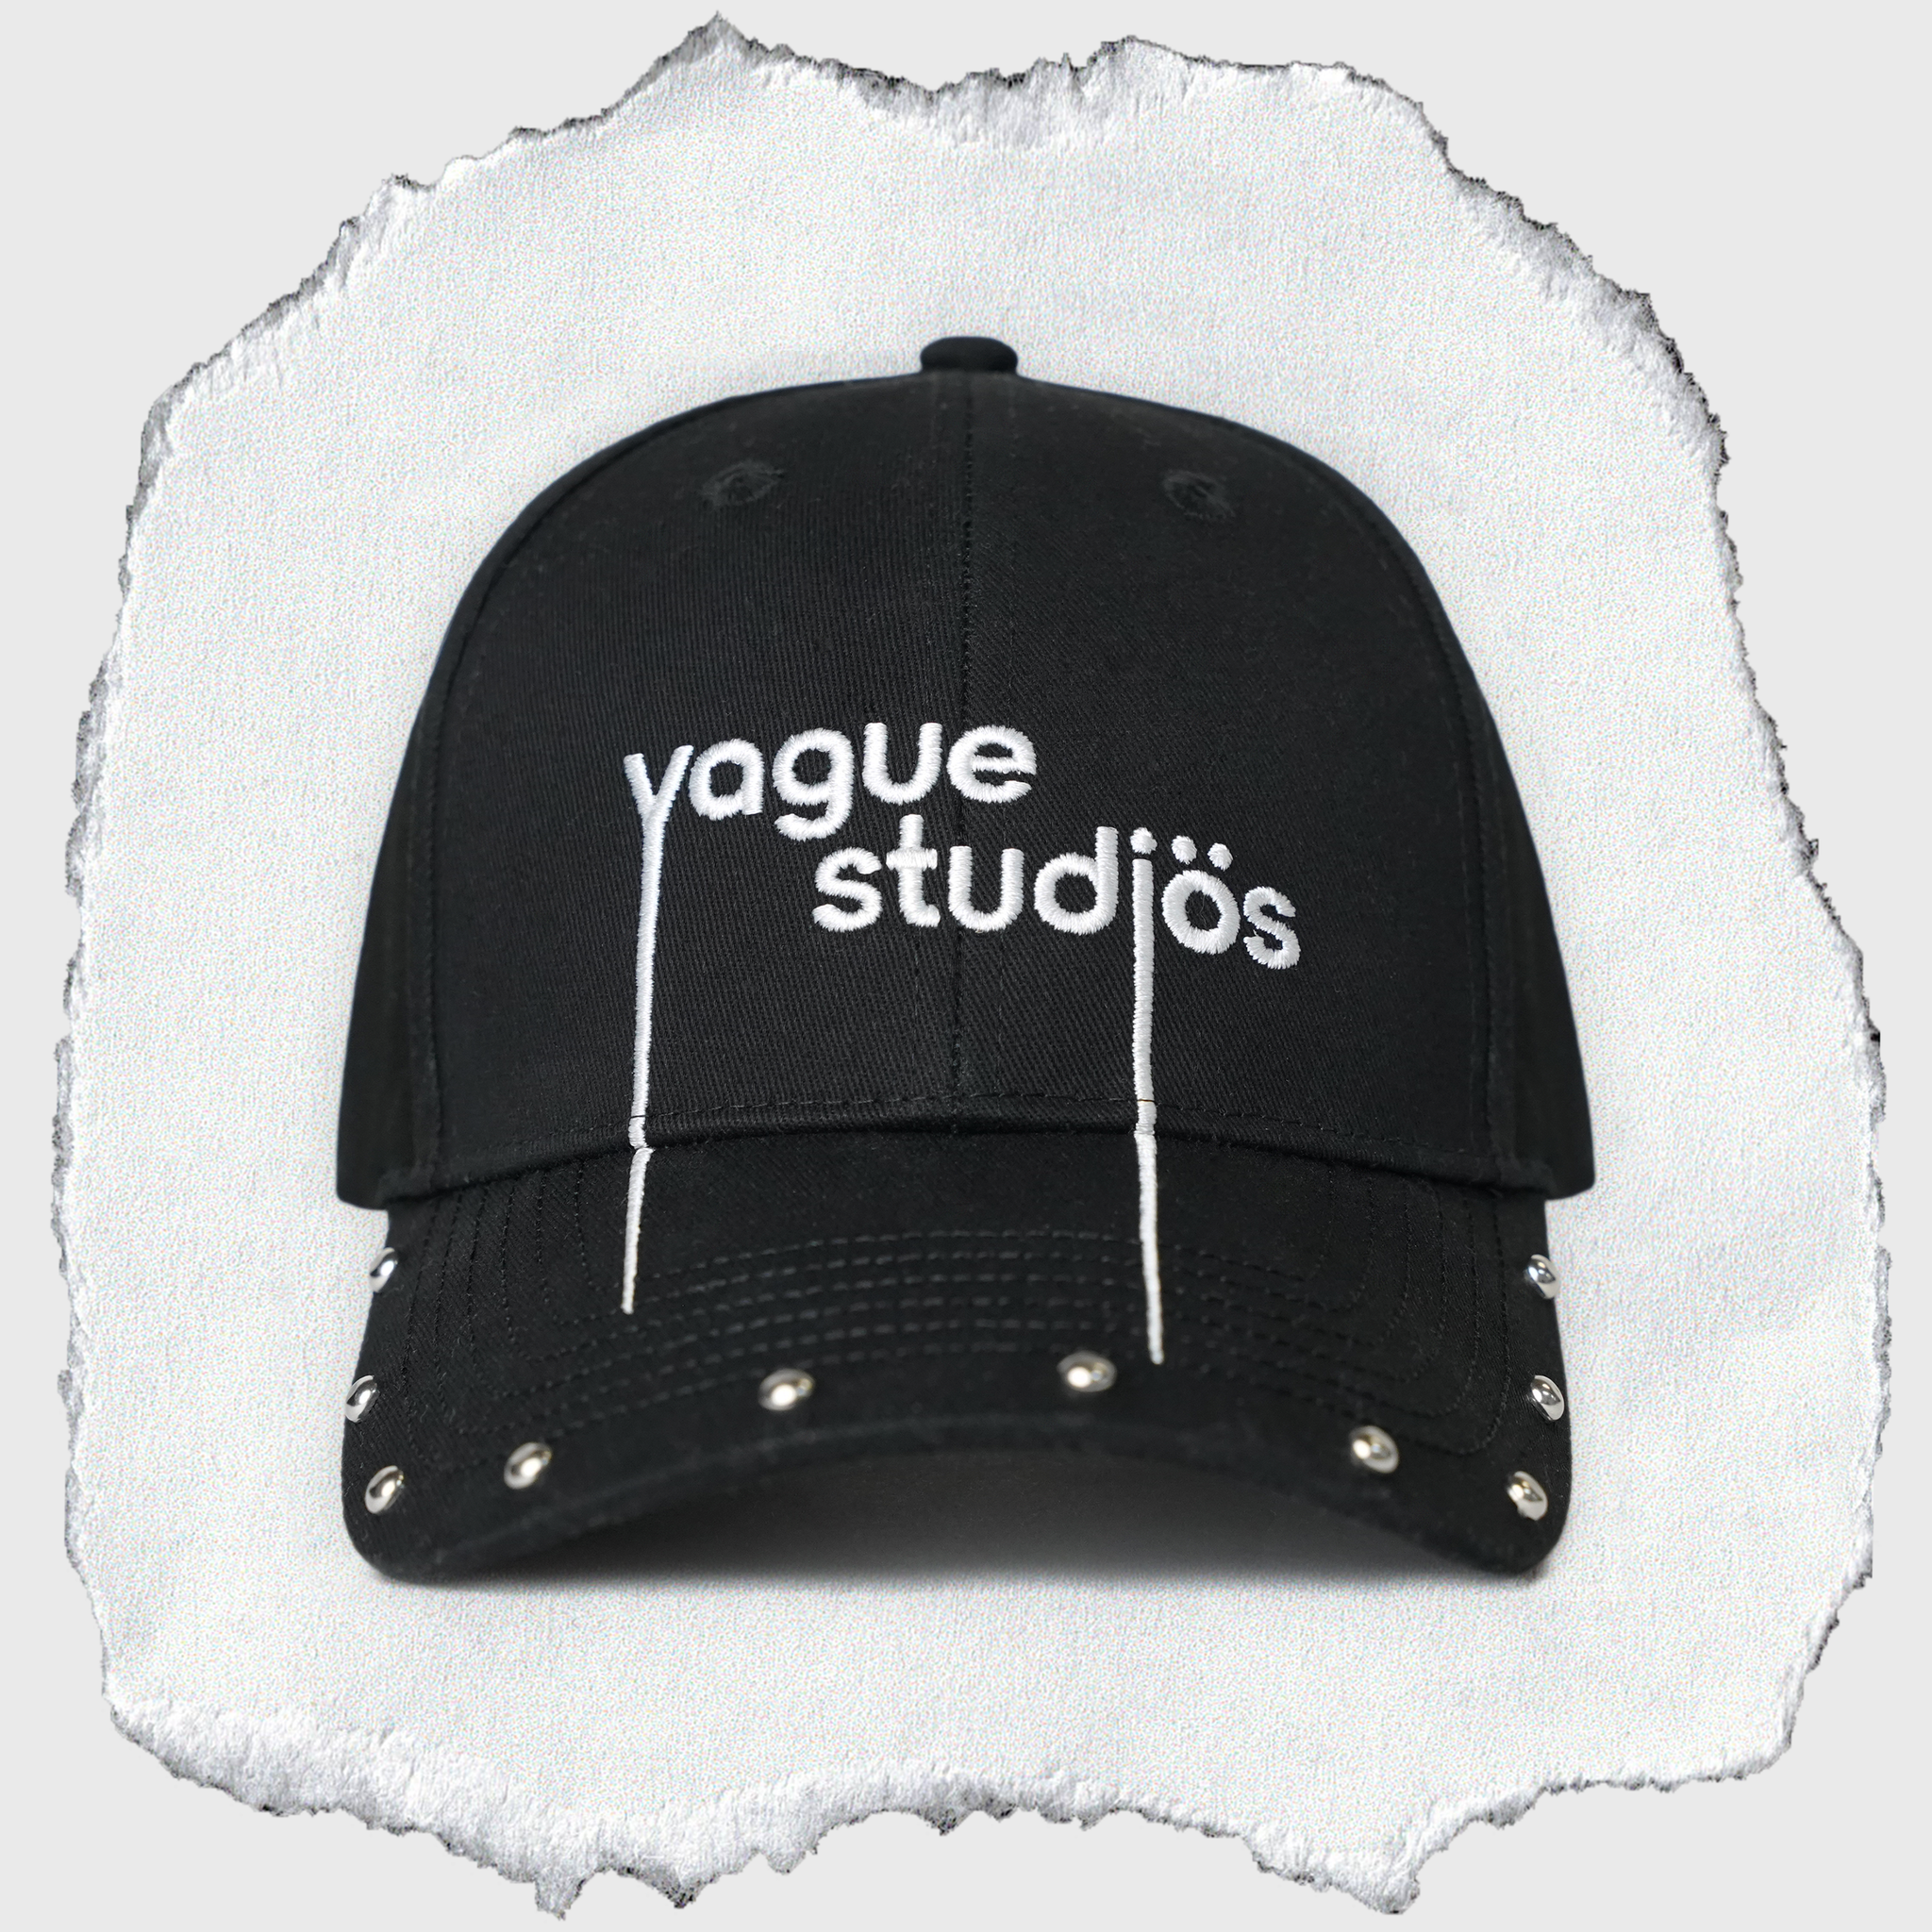 BORE STUDDED HAT